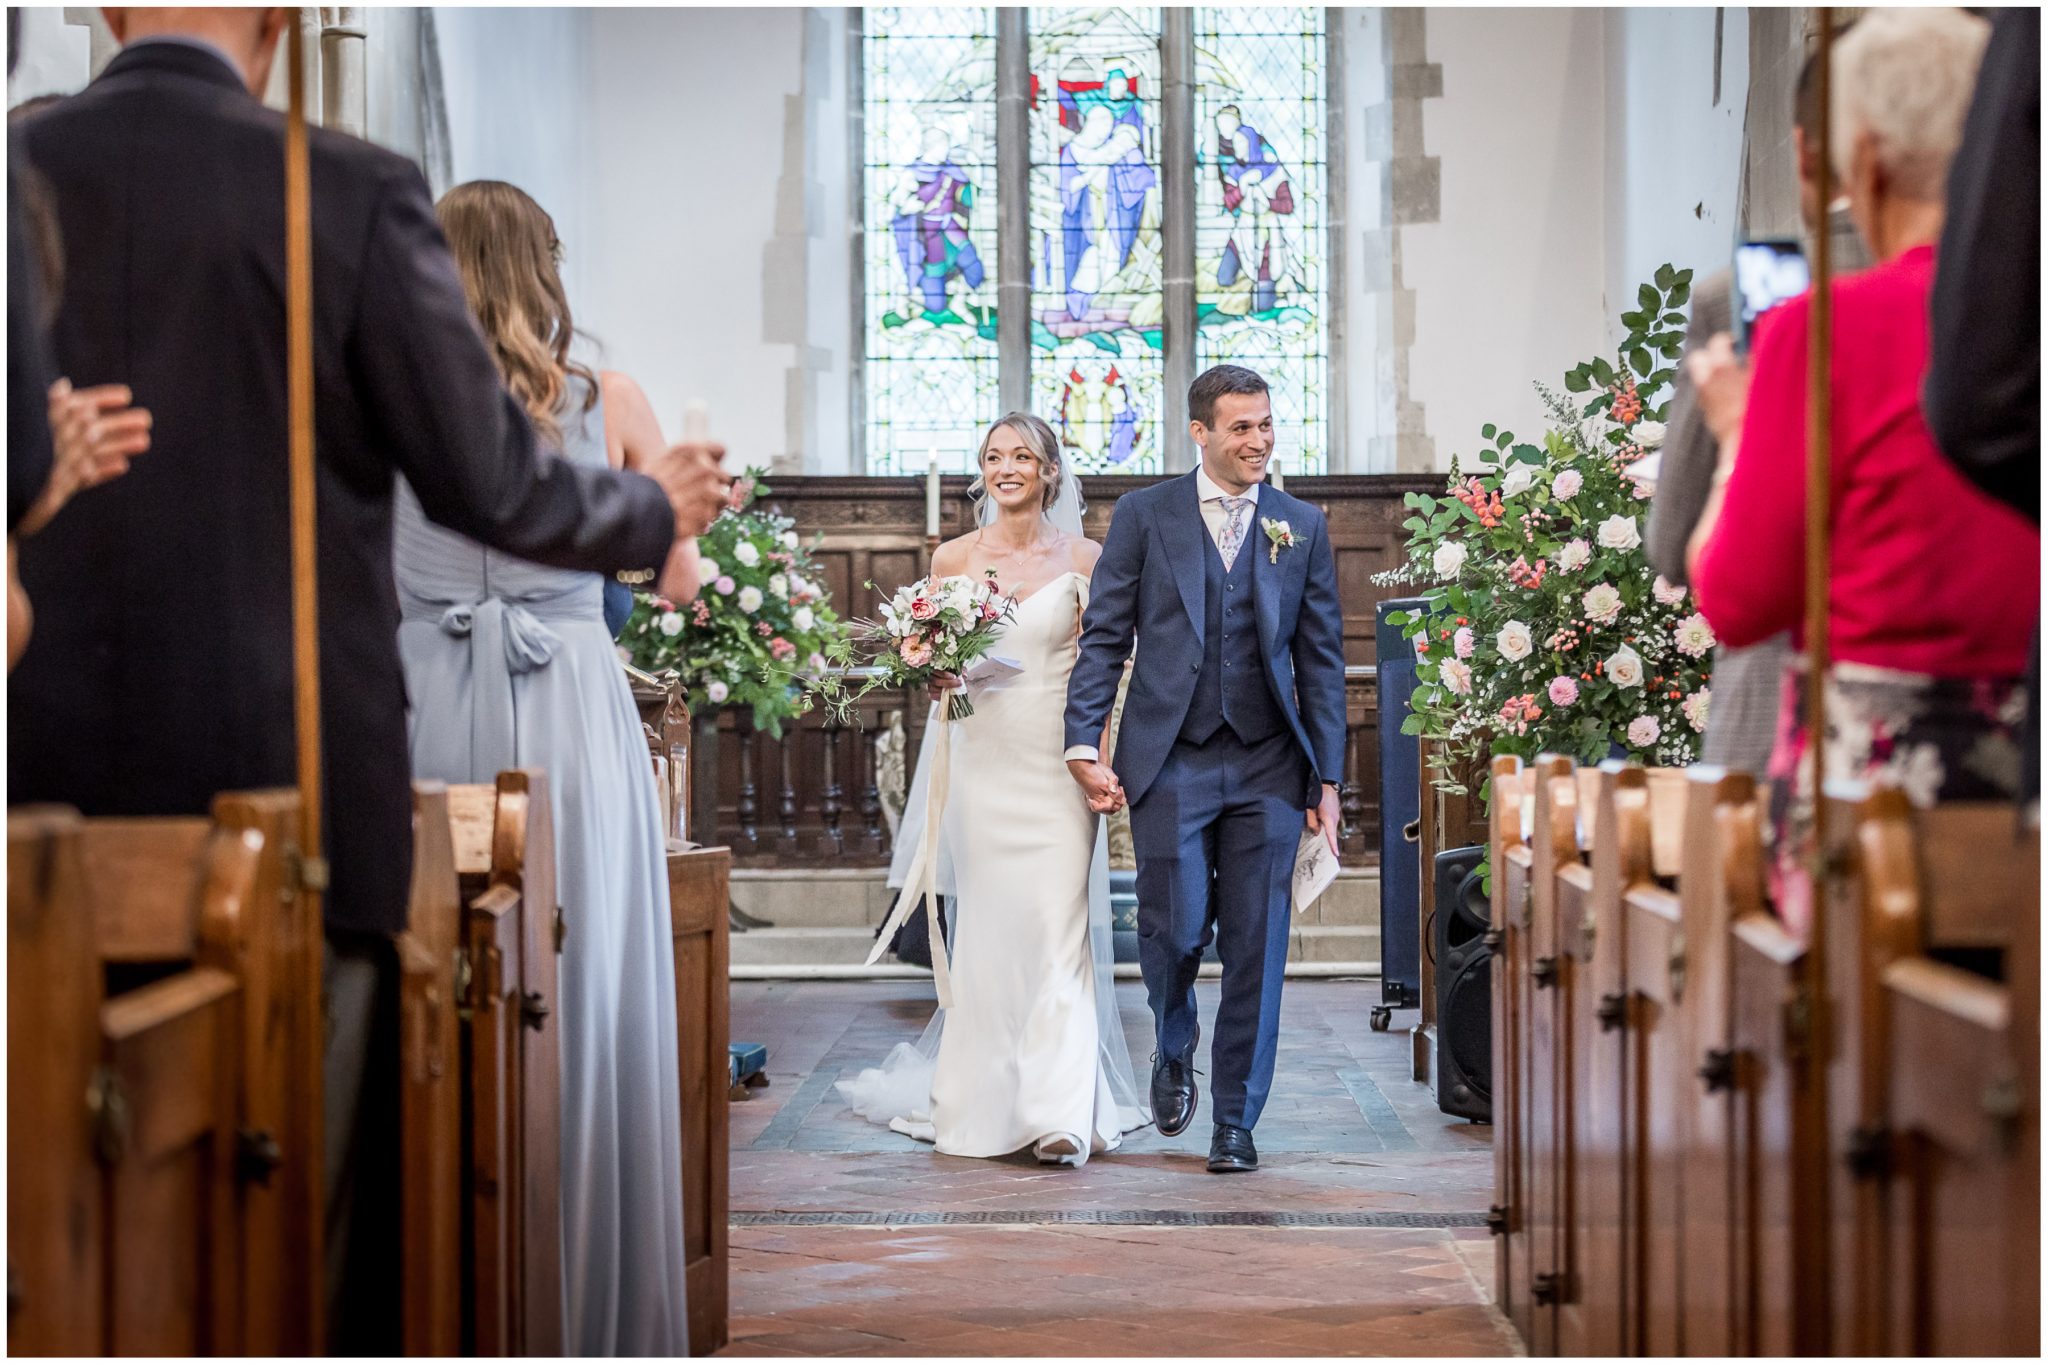 The newly married couple walk back down the aisle together as husband and wife